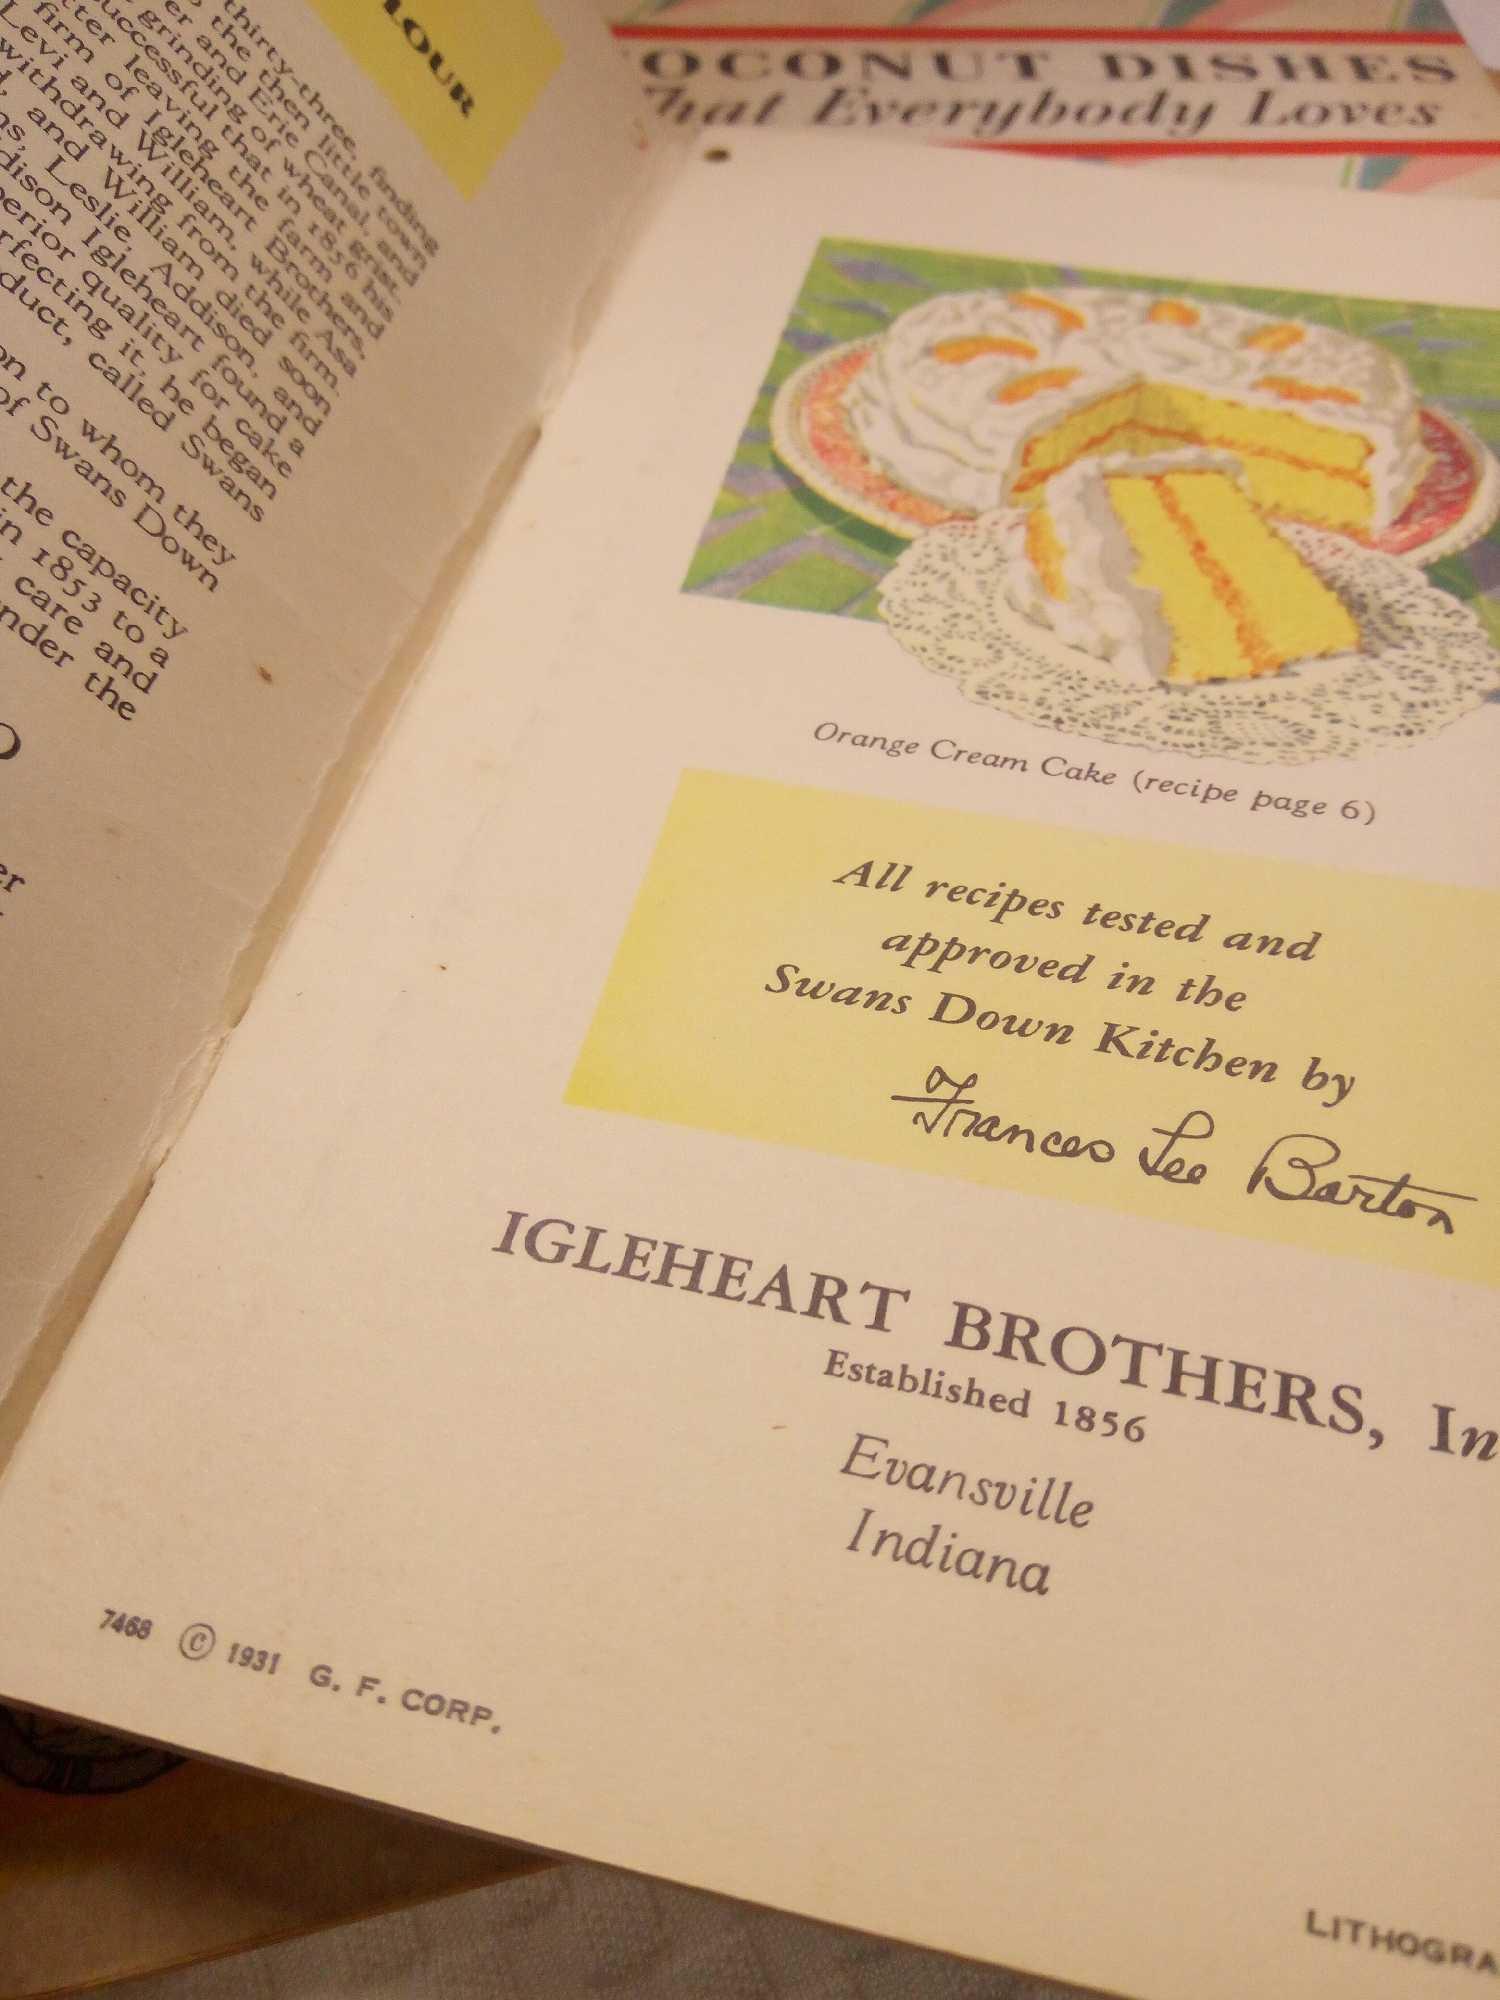 ADVERTISING AND COOKBOOKS FROM AS FAR BACK AS THE1930s